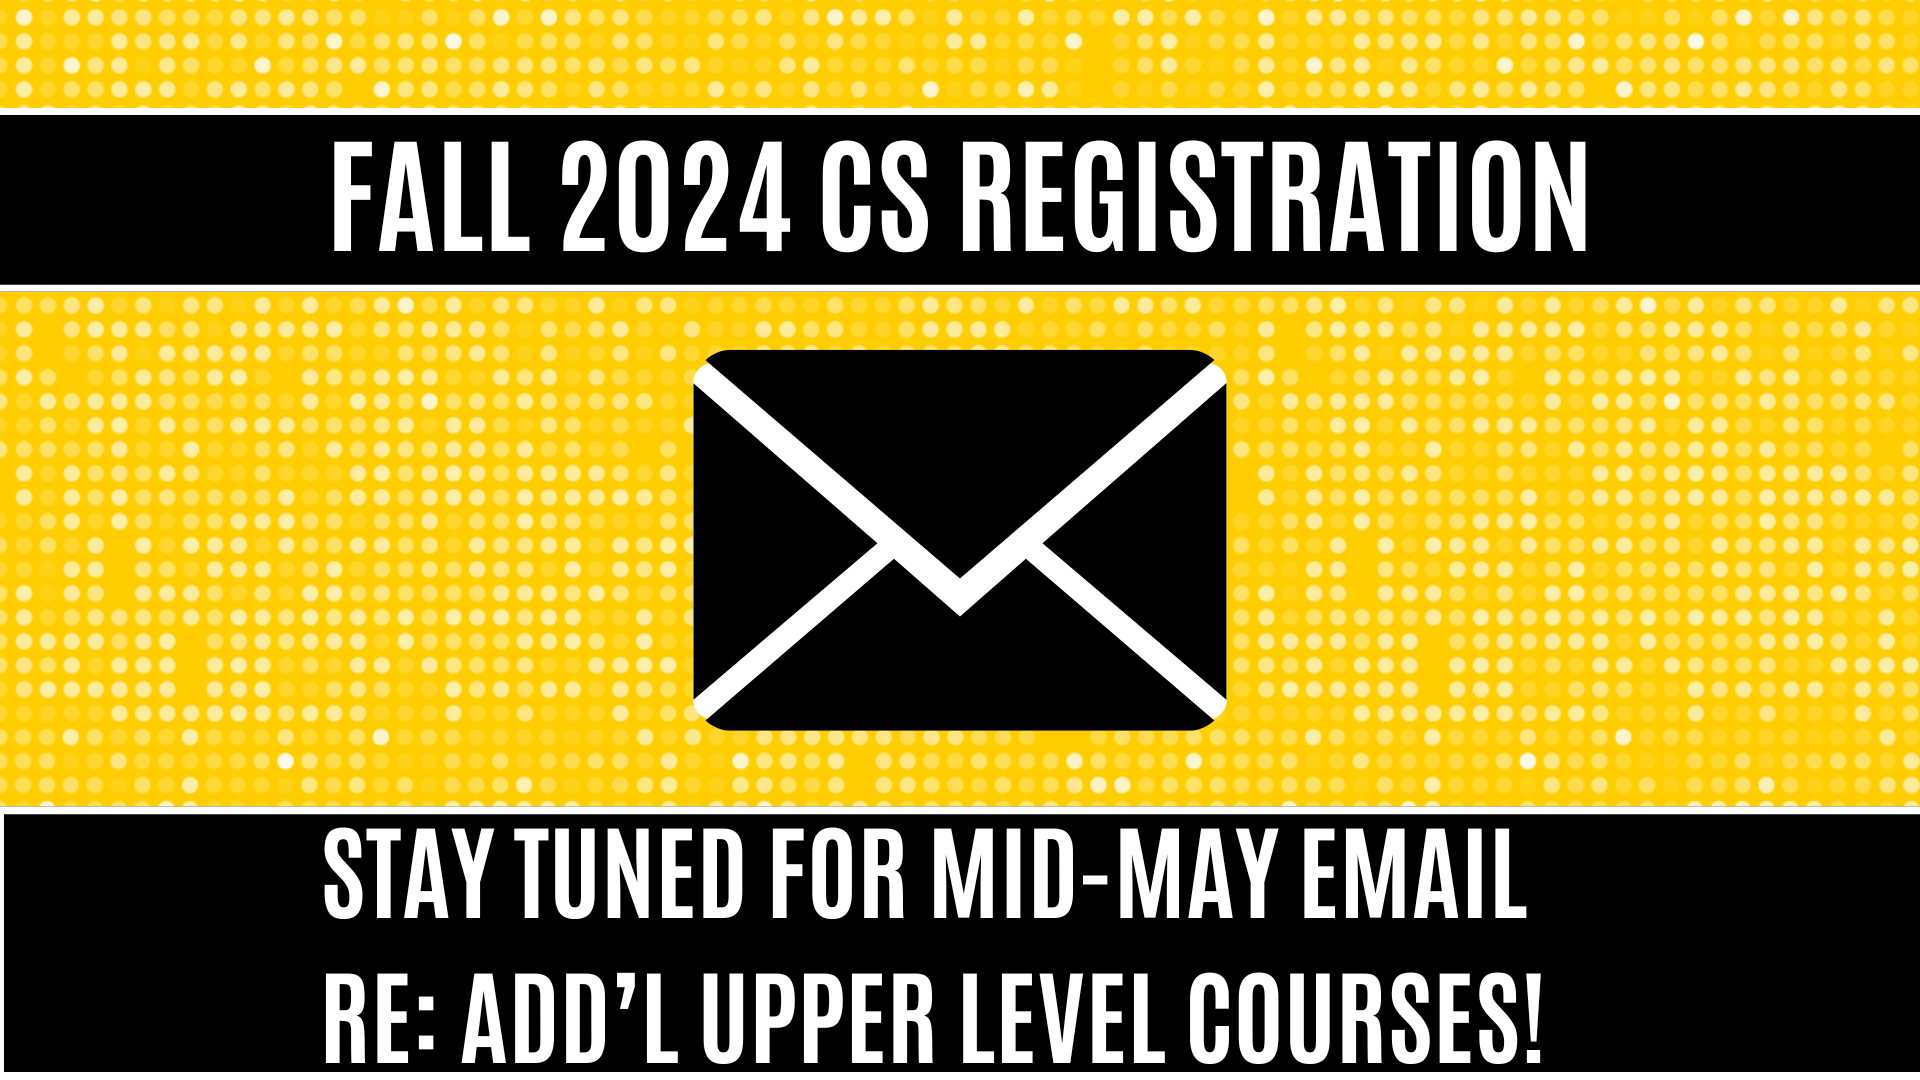  Fall 2024 CS Registration STAY TUNED FOR MID-MAY EMAIL   RE: ADD’L UPPER LEVEL COURSES!